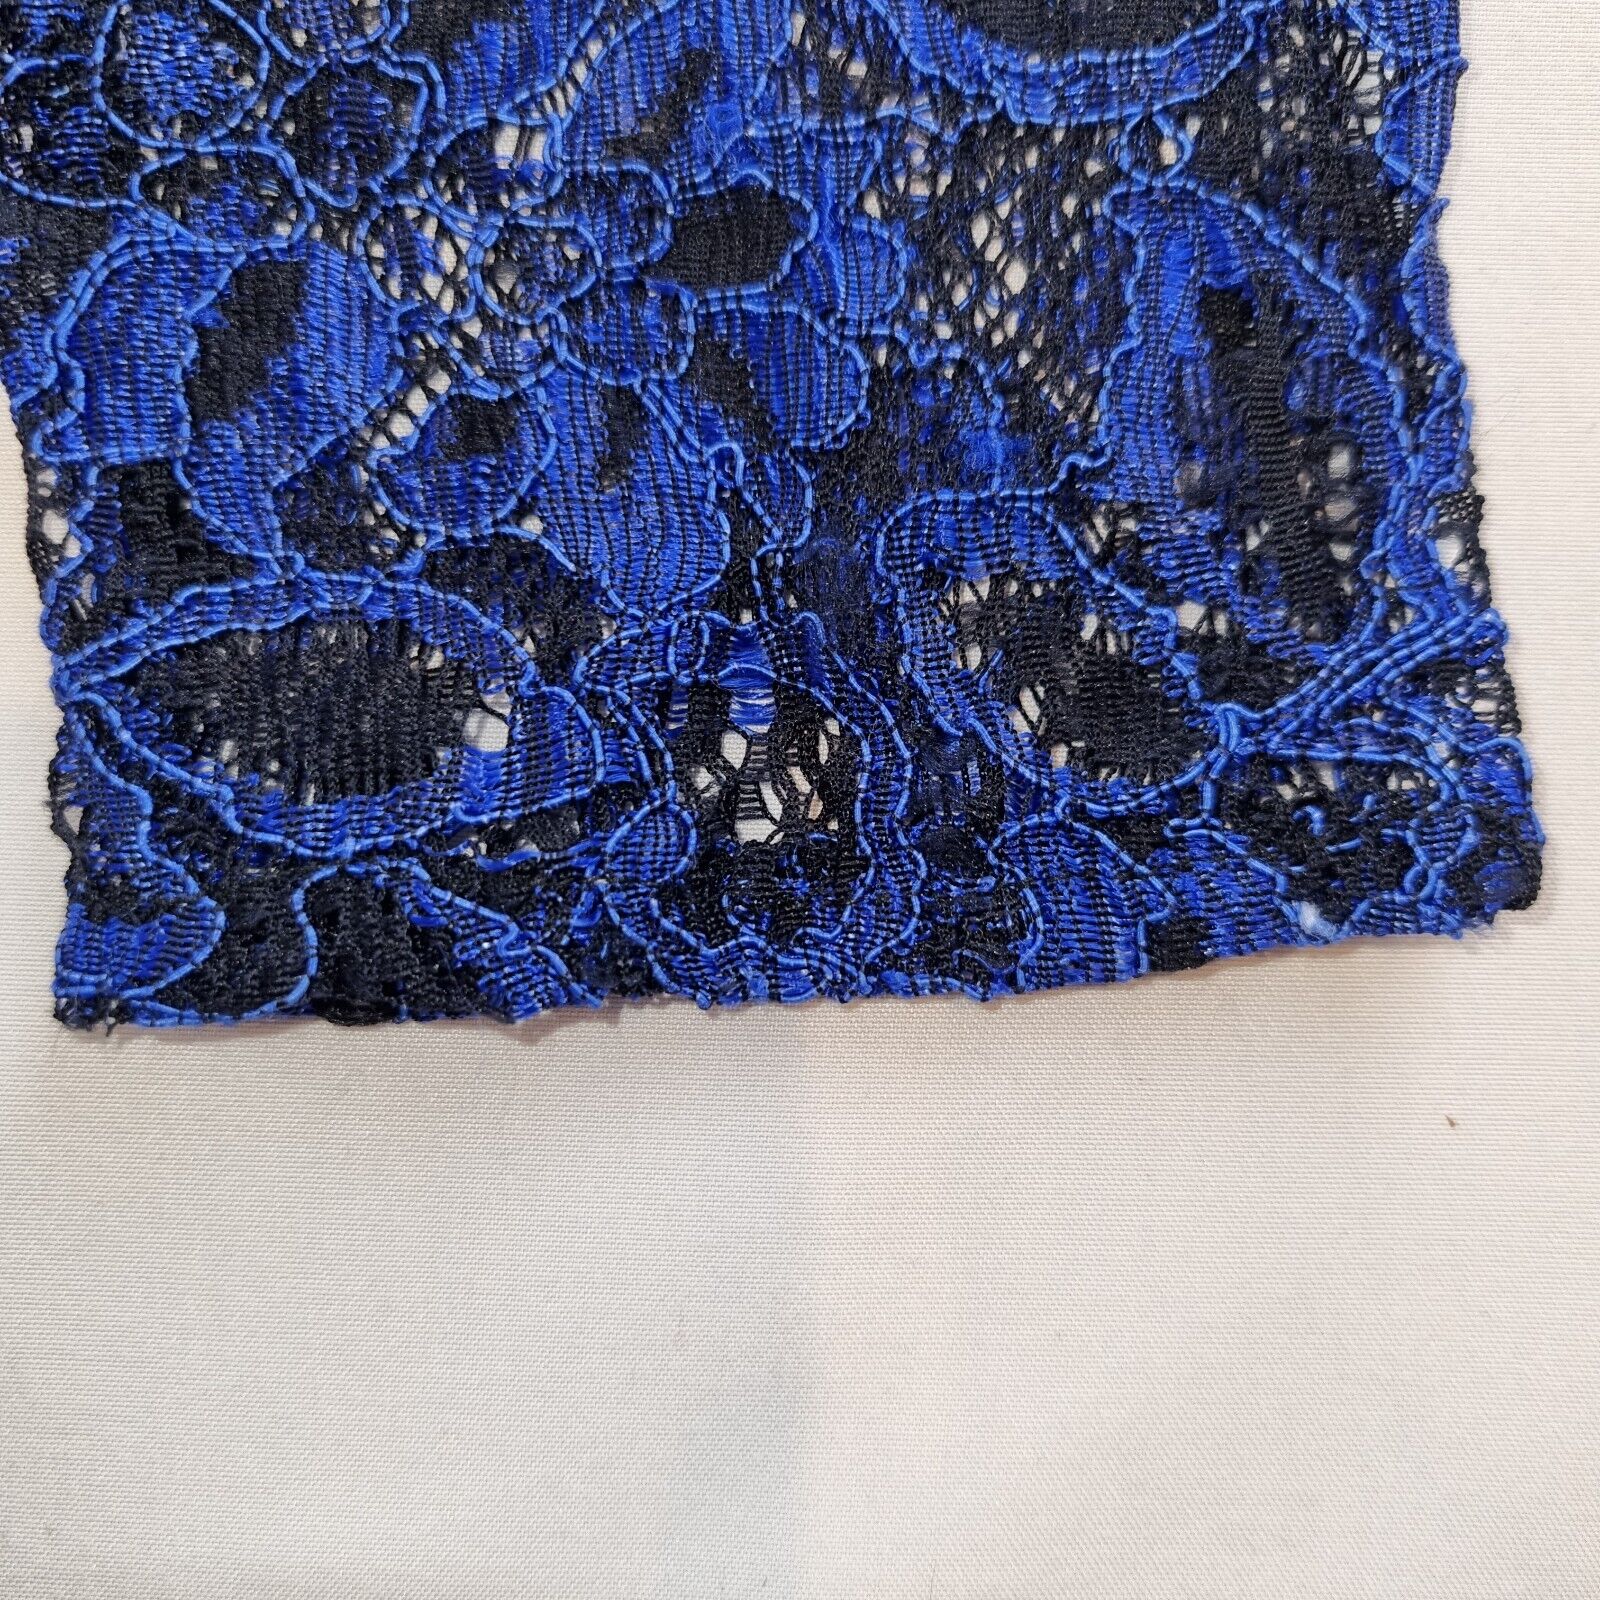 Ted Baker Womens Lace Top With Black Under Dress UK Size 10 Bright Pretty Blue - Bonnie Lassio